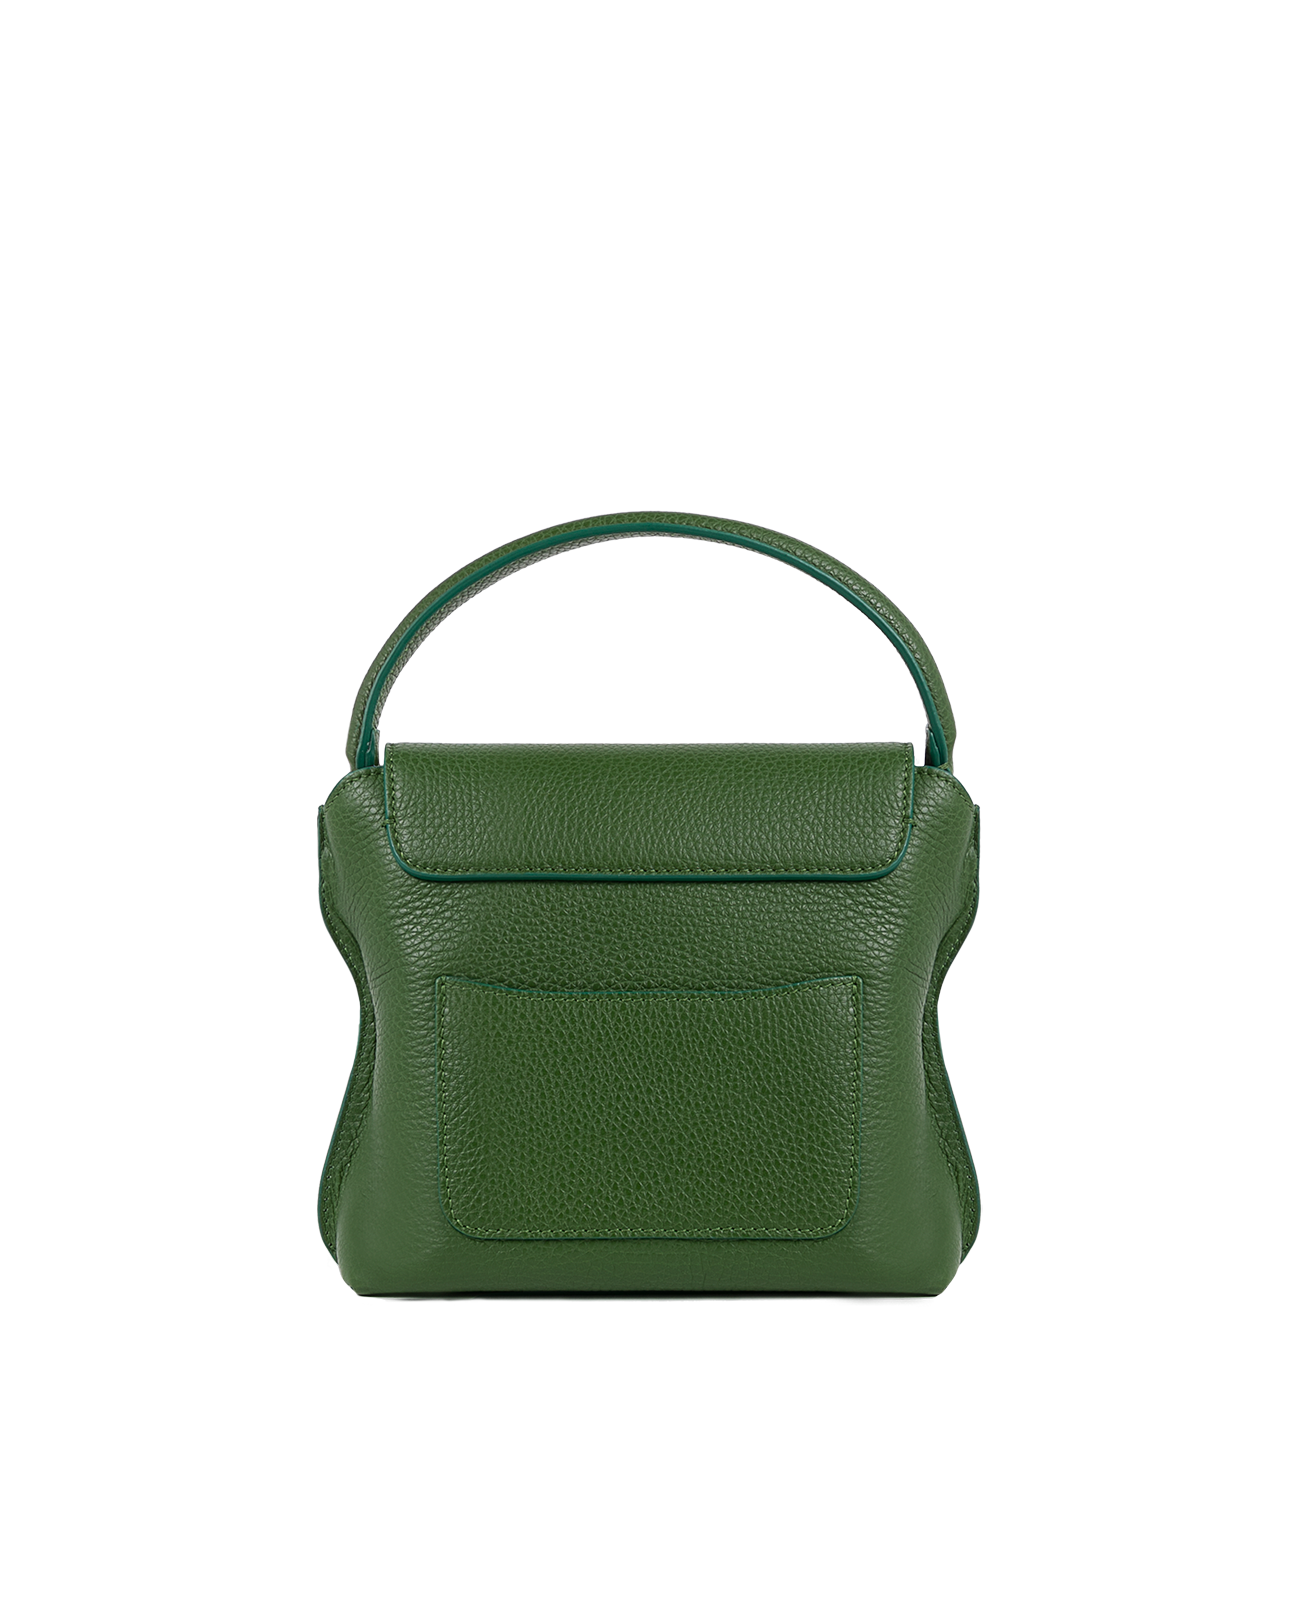 Cross-body bag in Italian full-grain leather, semi-aniline calf Italian leather with detachable shoulder strap.Three compartments, zip pocket in the back compartment. Magnetic flap closure with logo. Color: Green. Size: Medium.